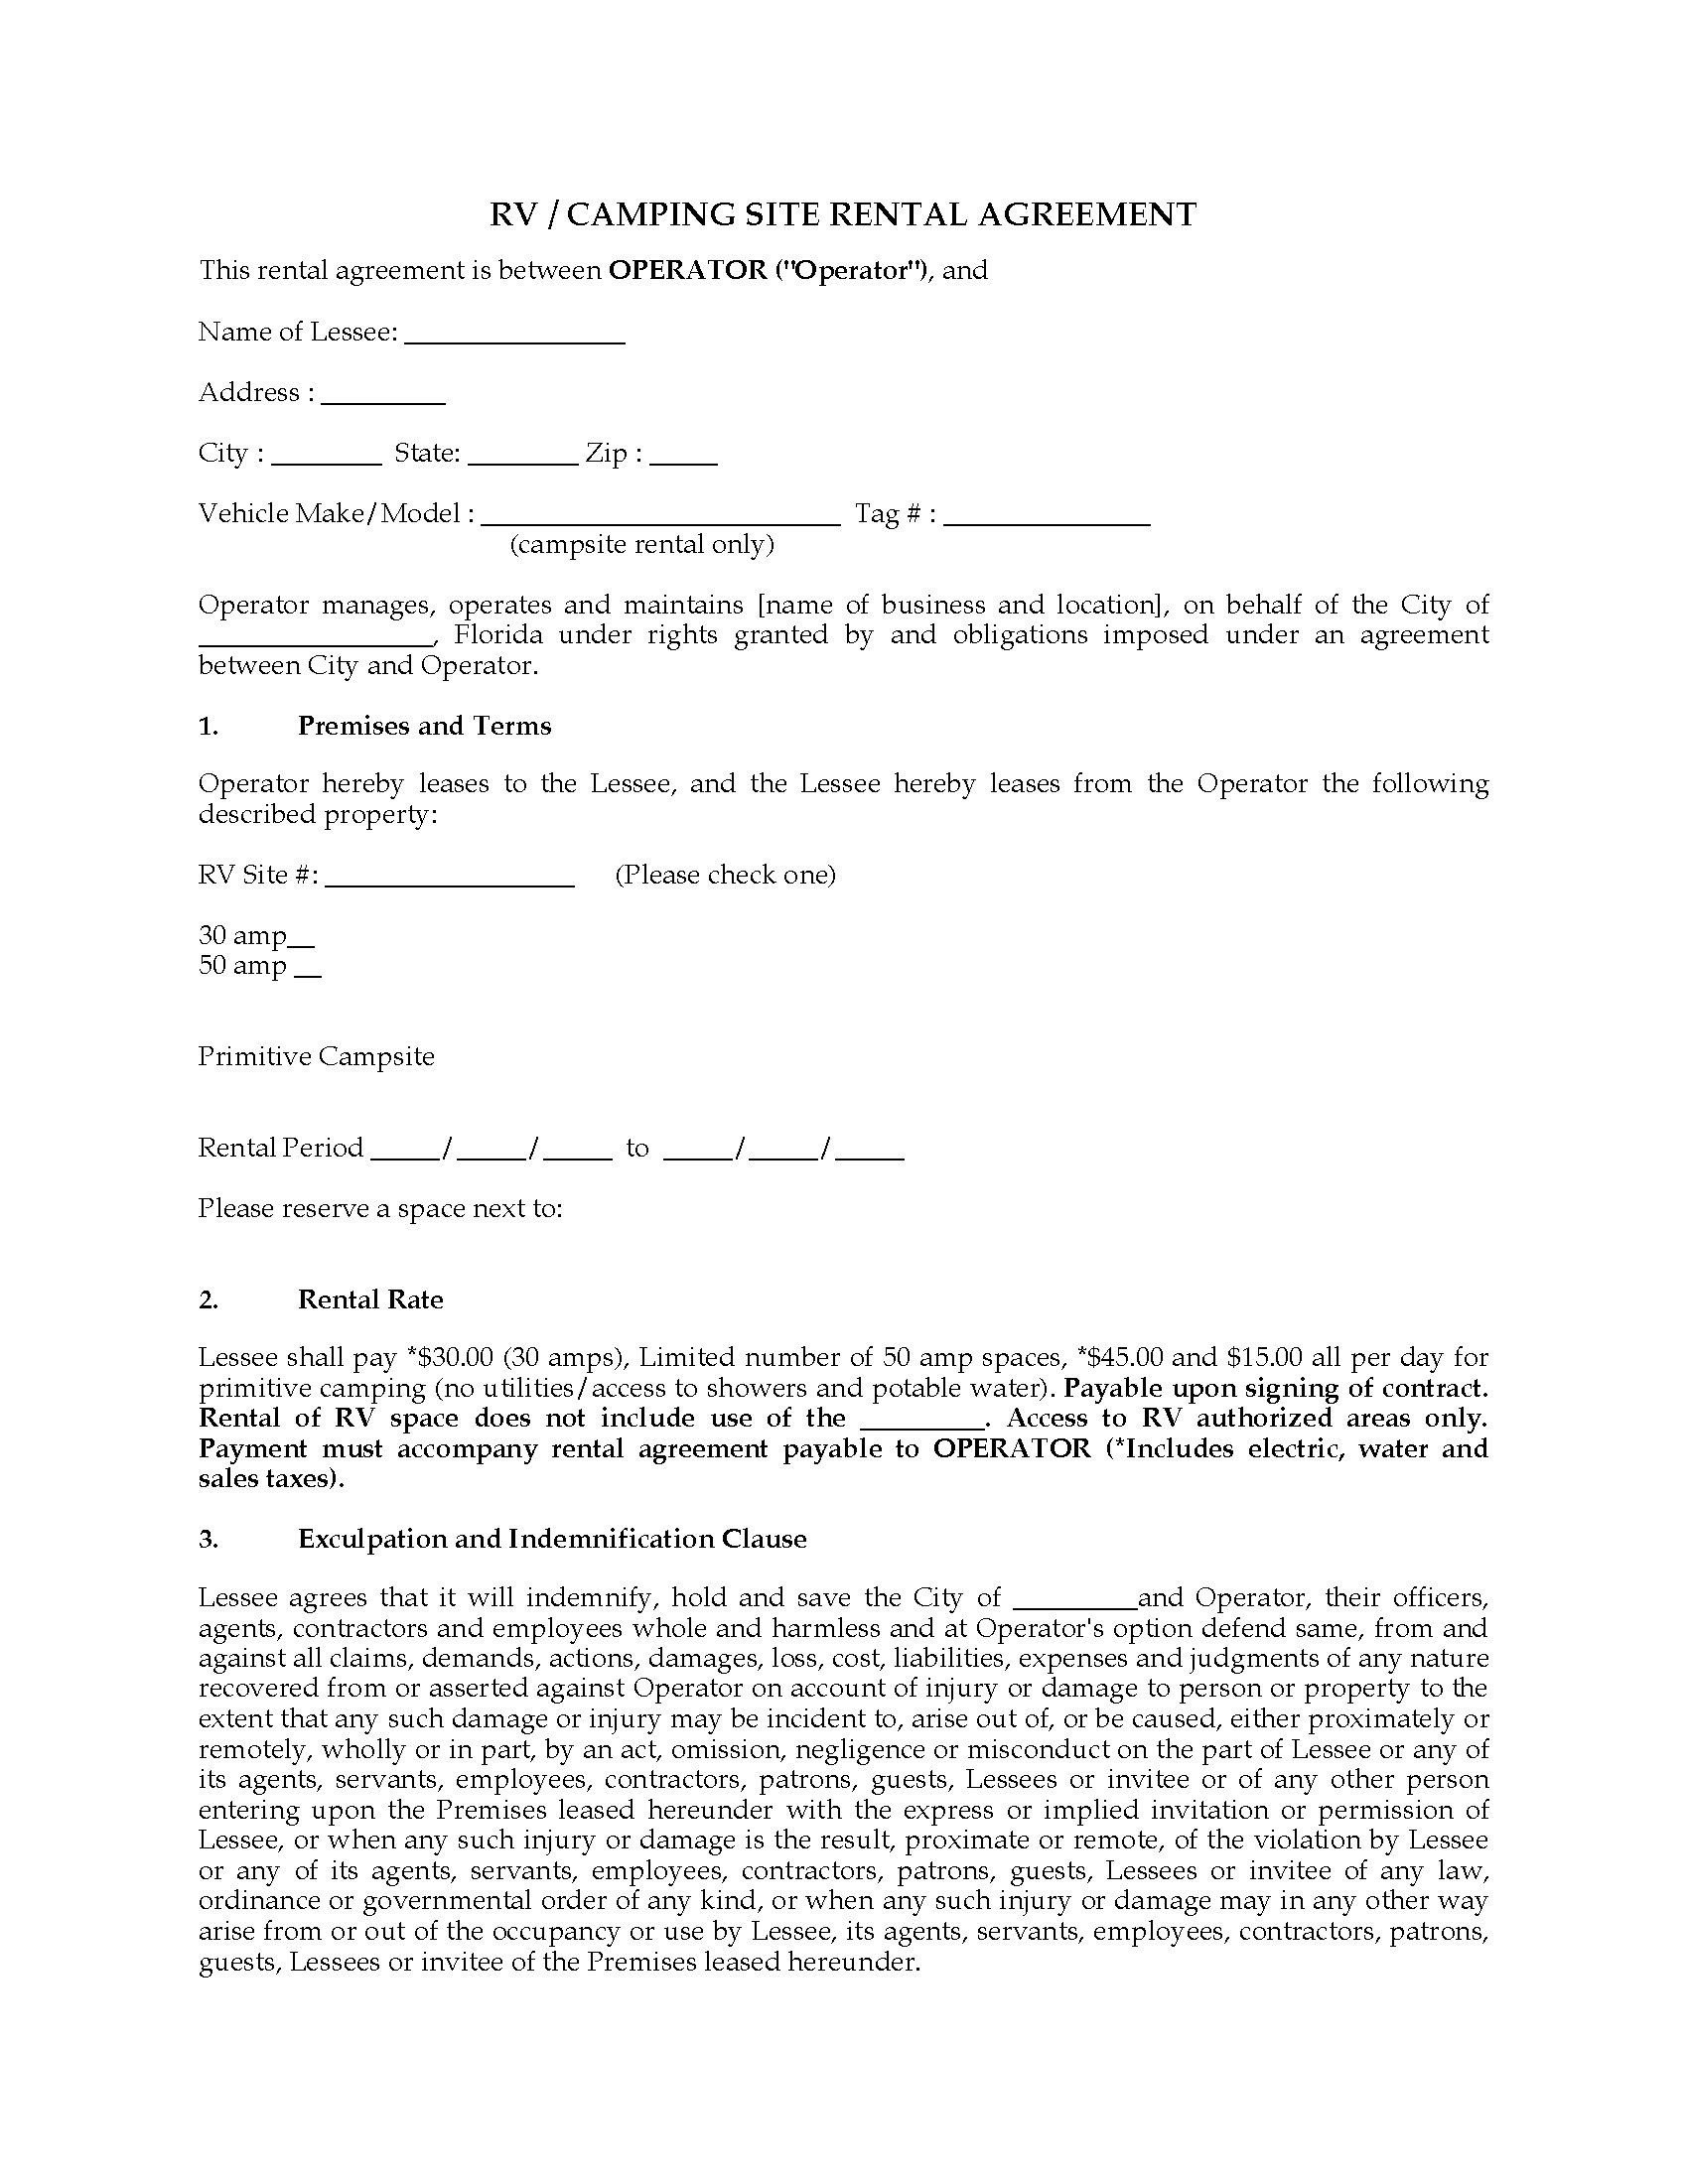 Florida RV / Camping Site Rental Agreement  Legal Forms and For rv rental agreement template